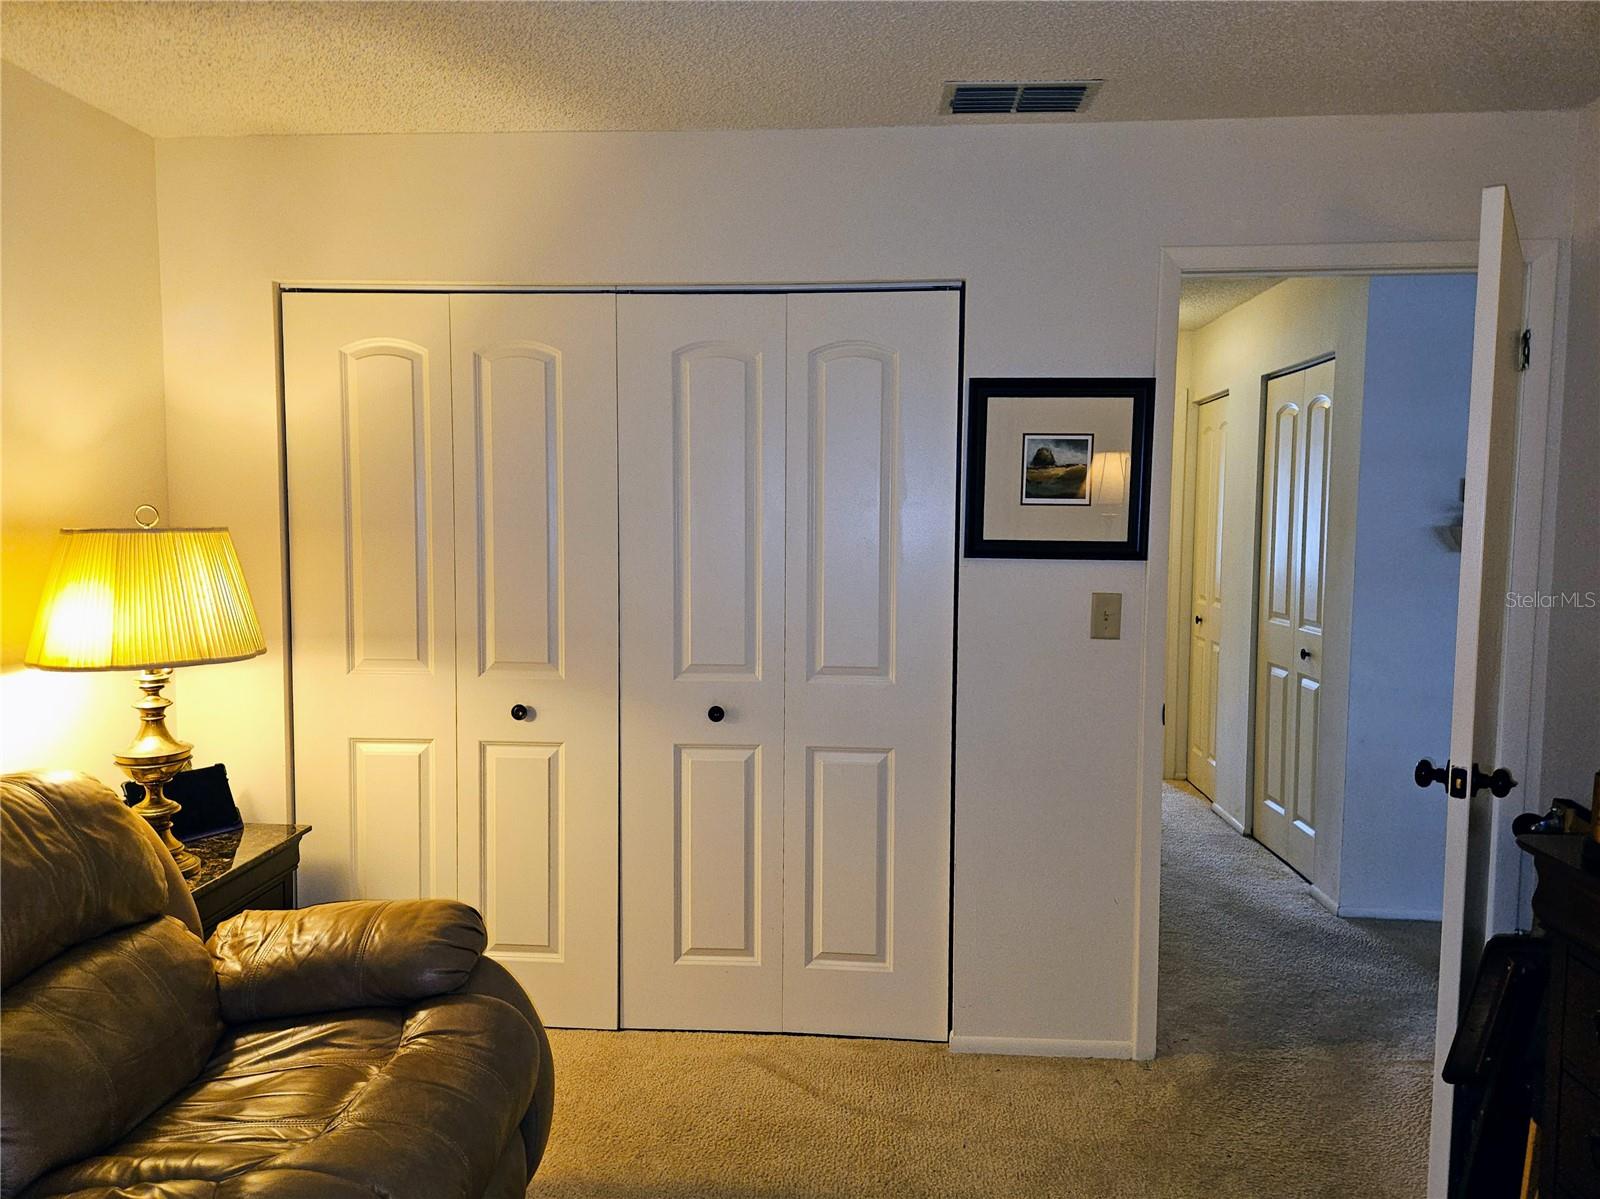 Guest Bedroom has Large Double Closet and Is Adjacent to the Guest Bathroom